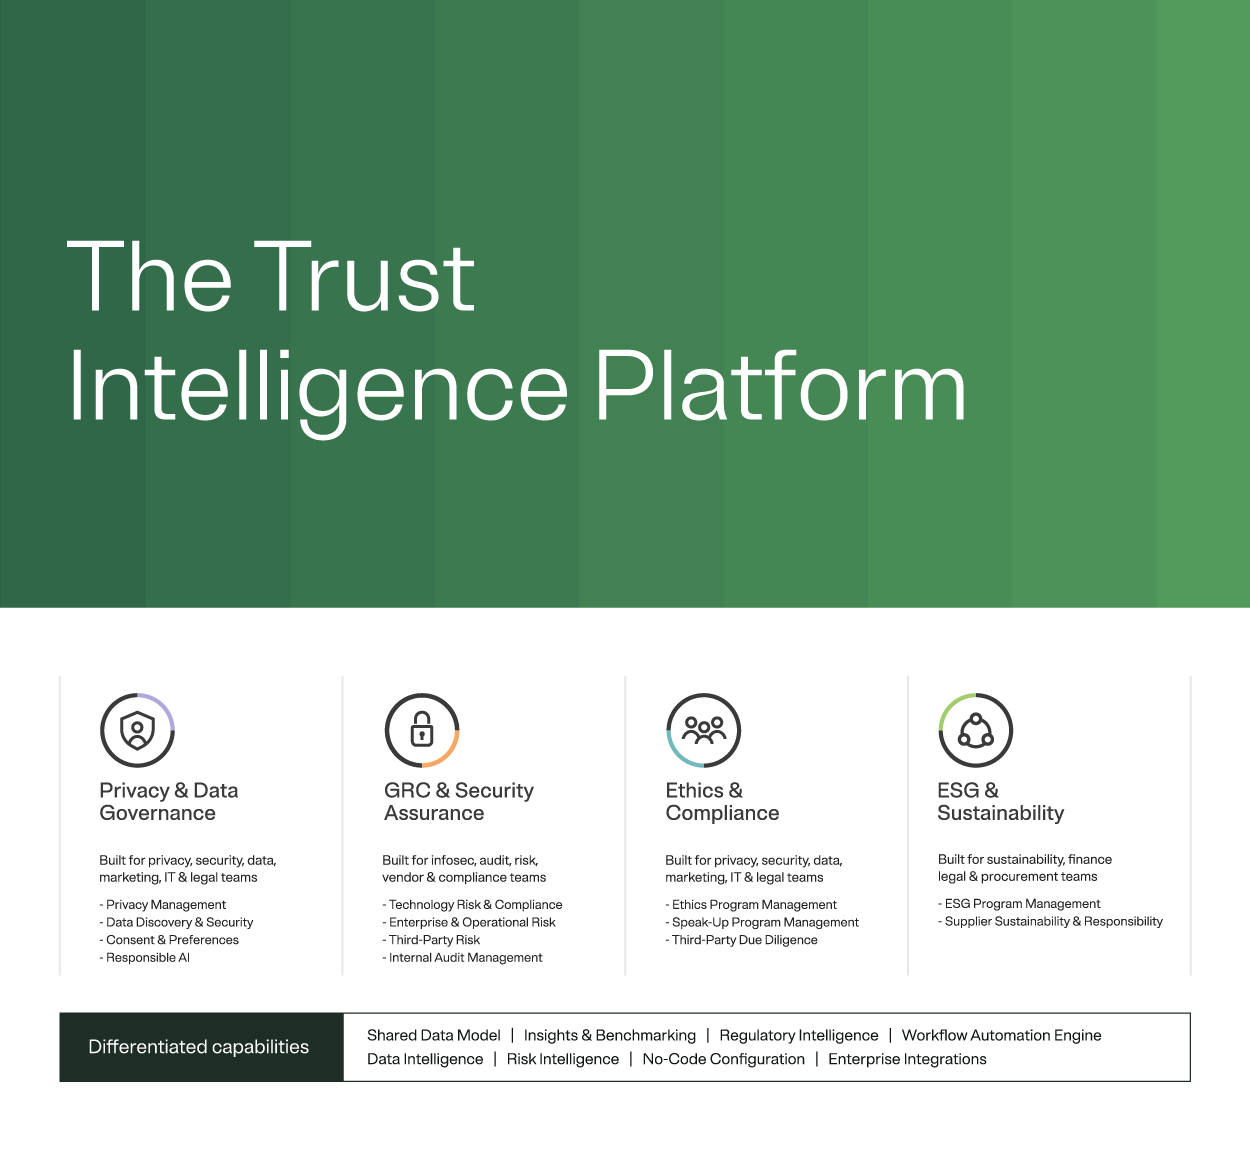 OneTrust Demo: Get to Know the OneTrust Privacy & Data Governance Cloud -  DATAVERSITY